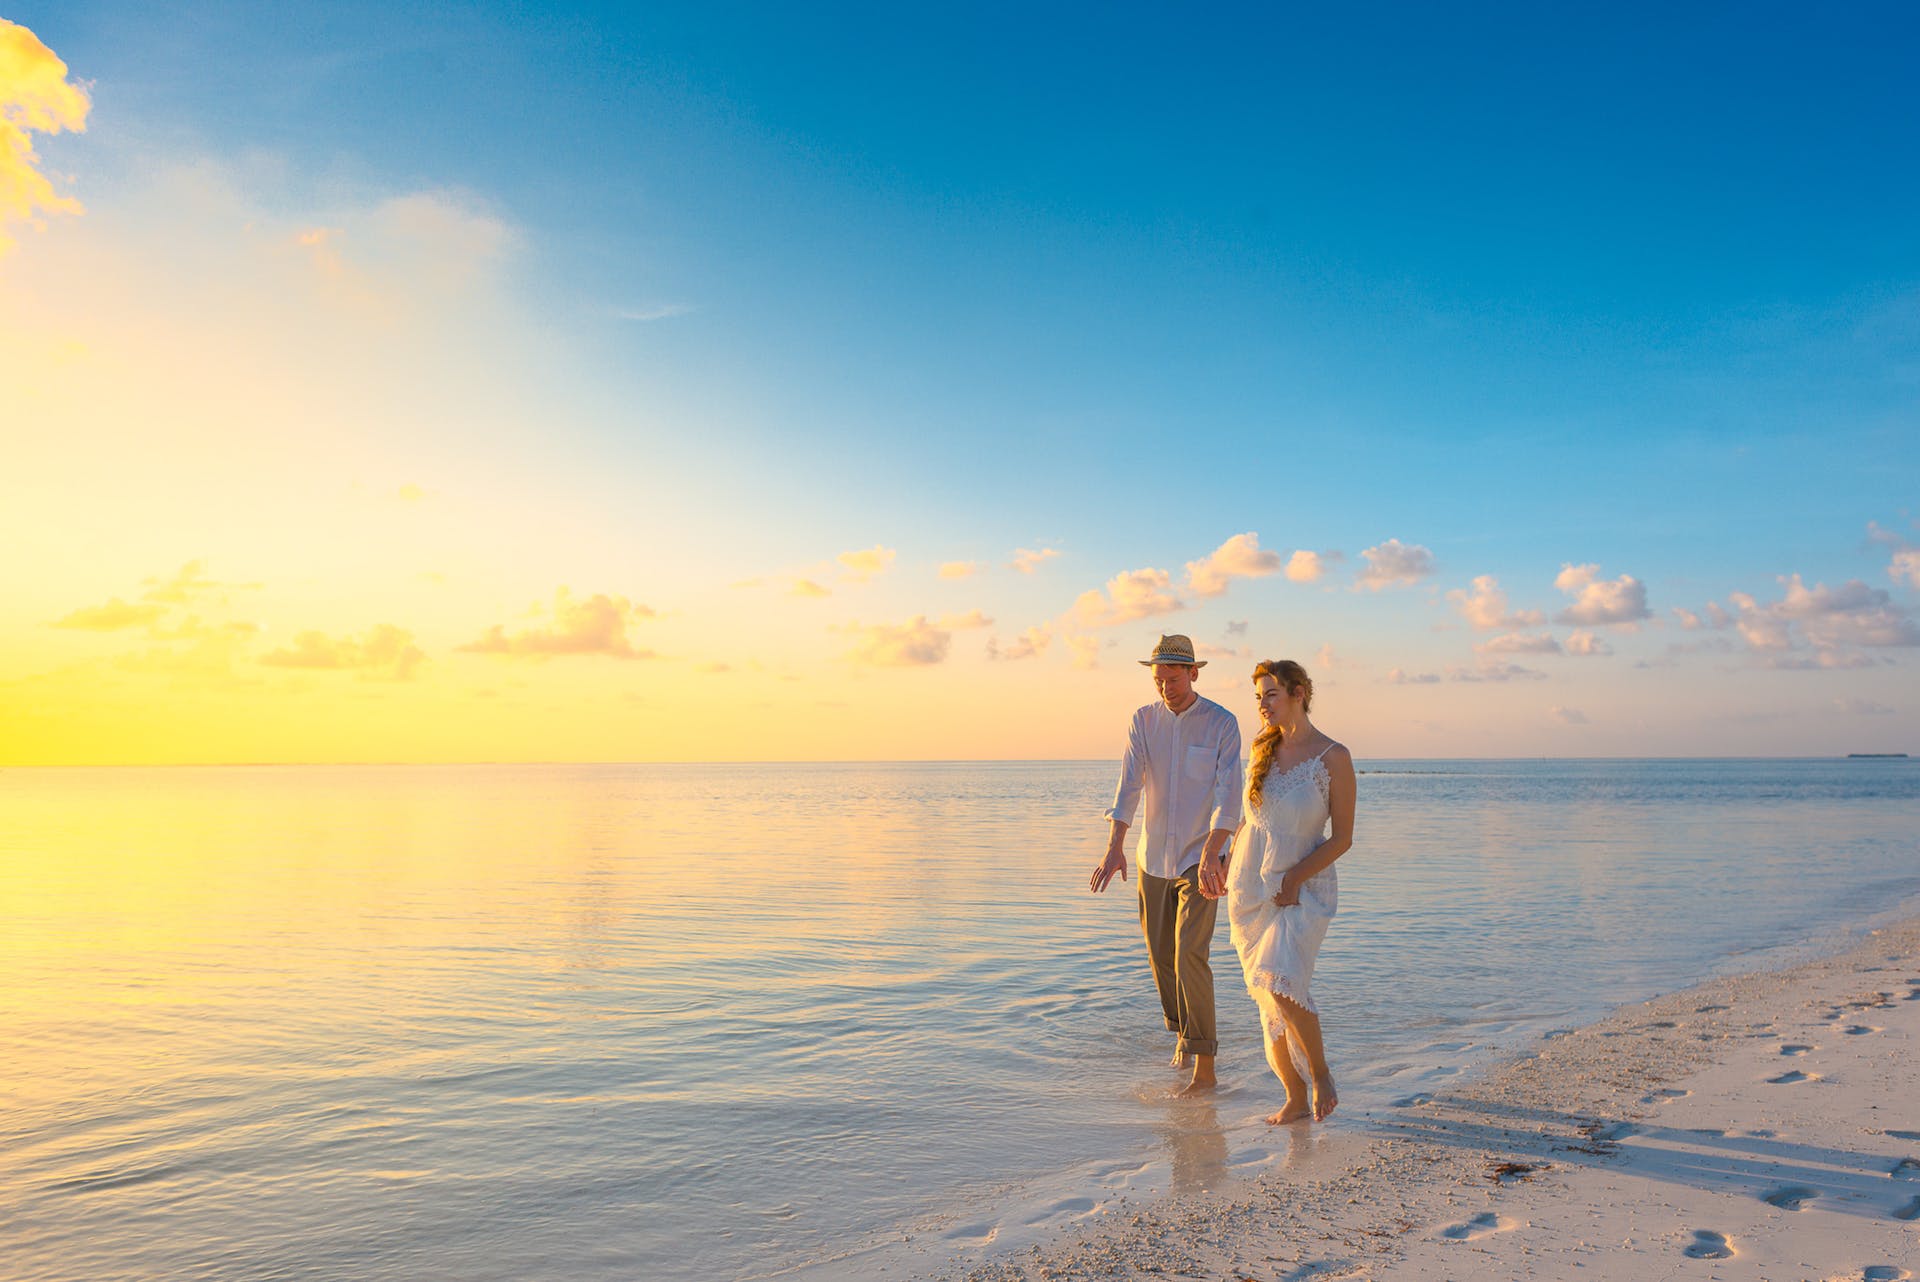 A couple walking on a beach | Source: Pexels